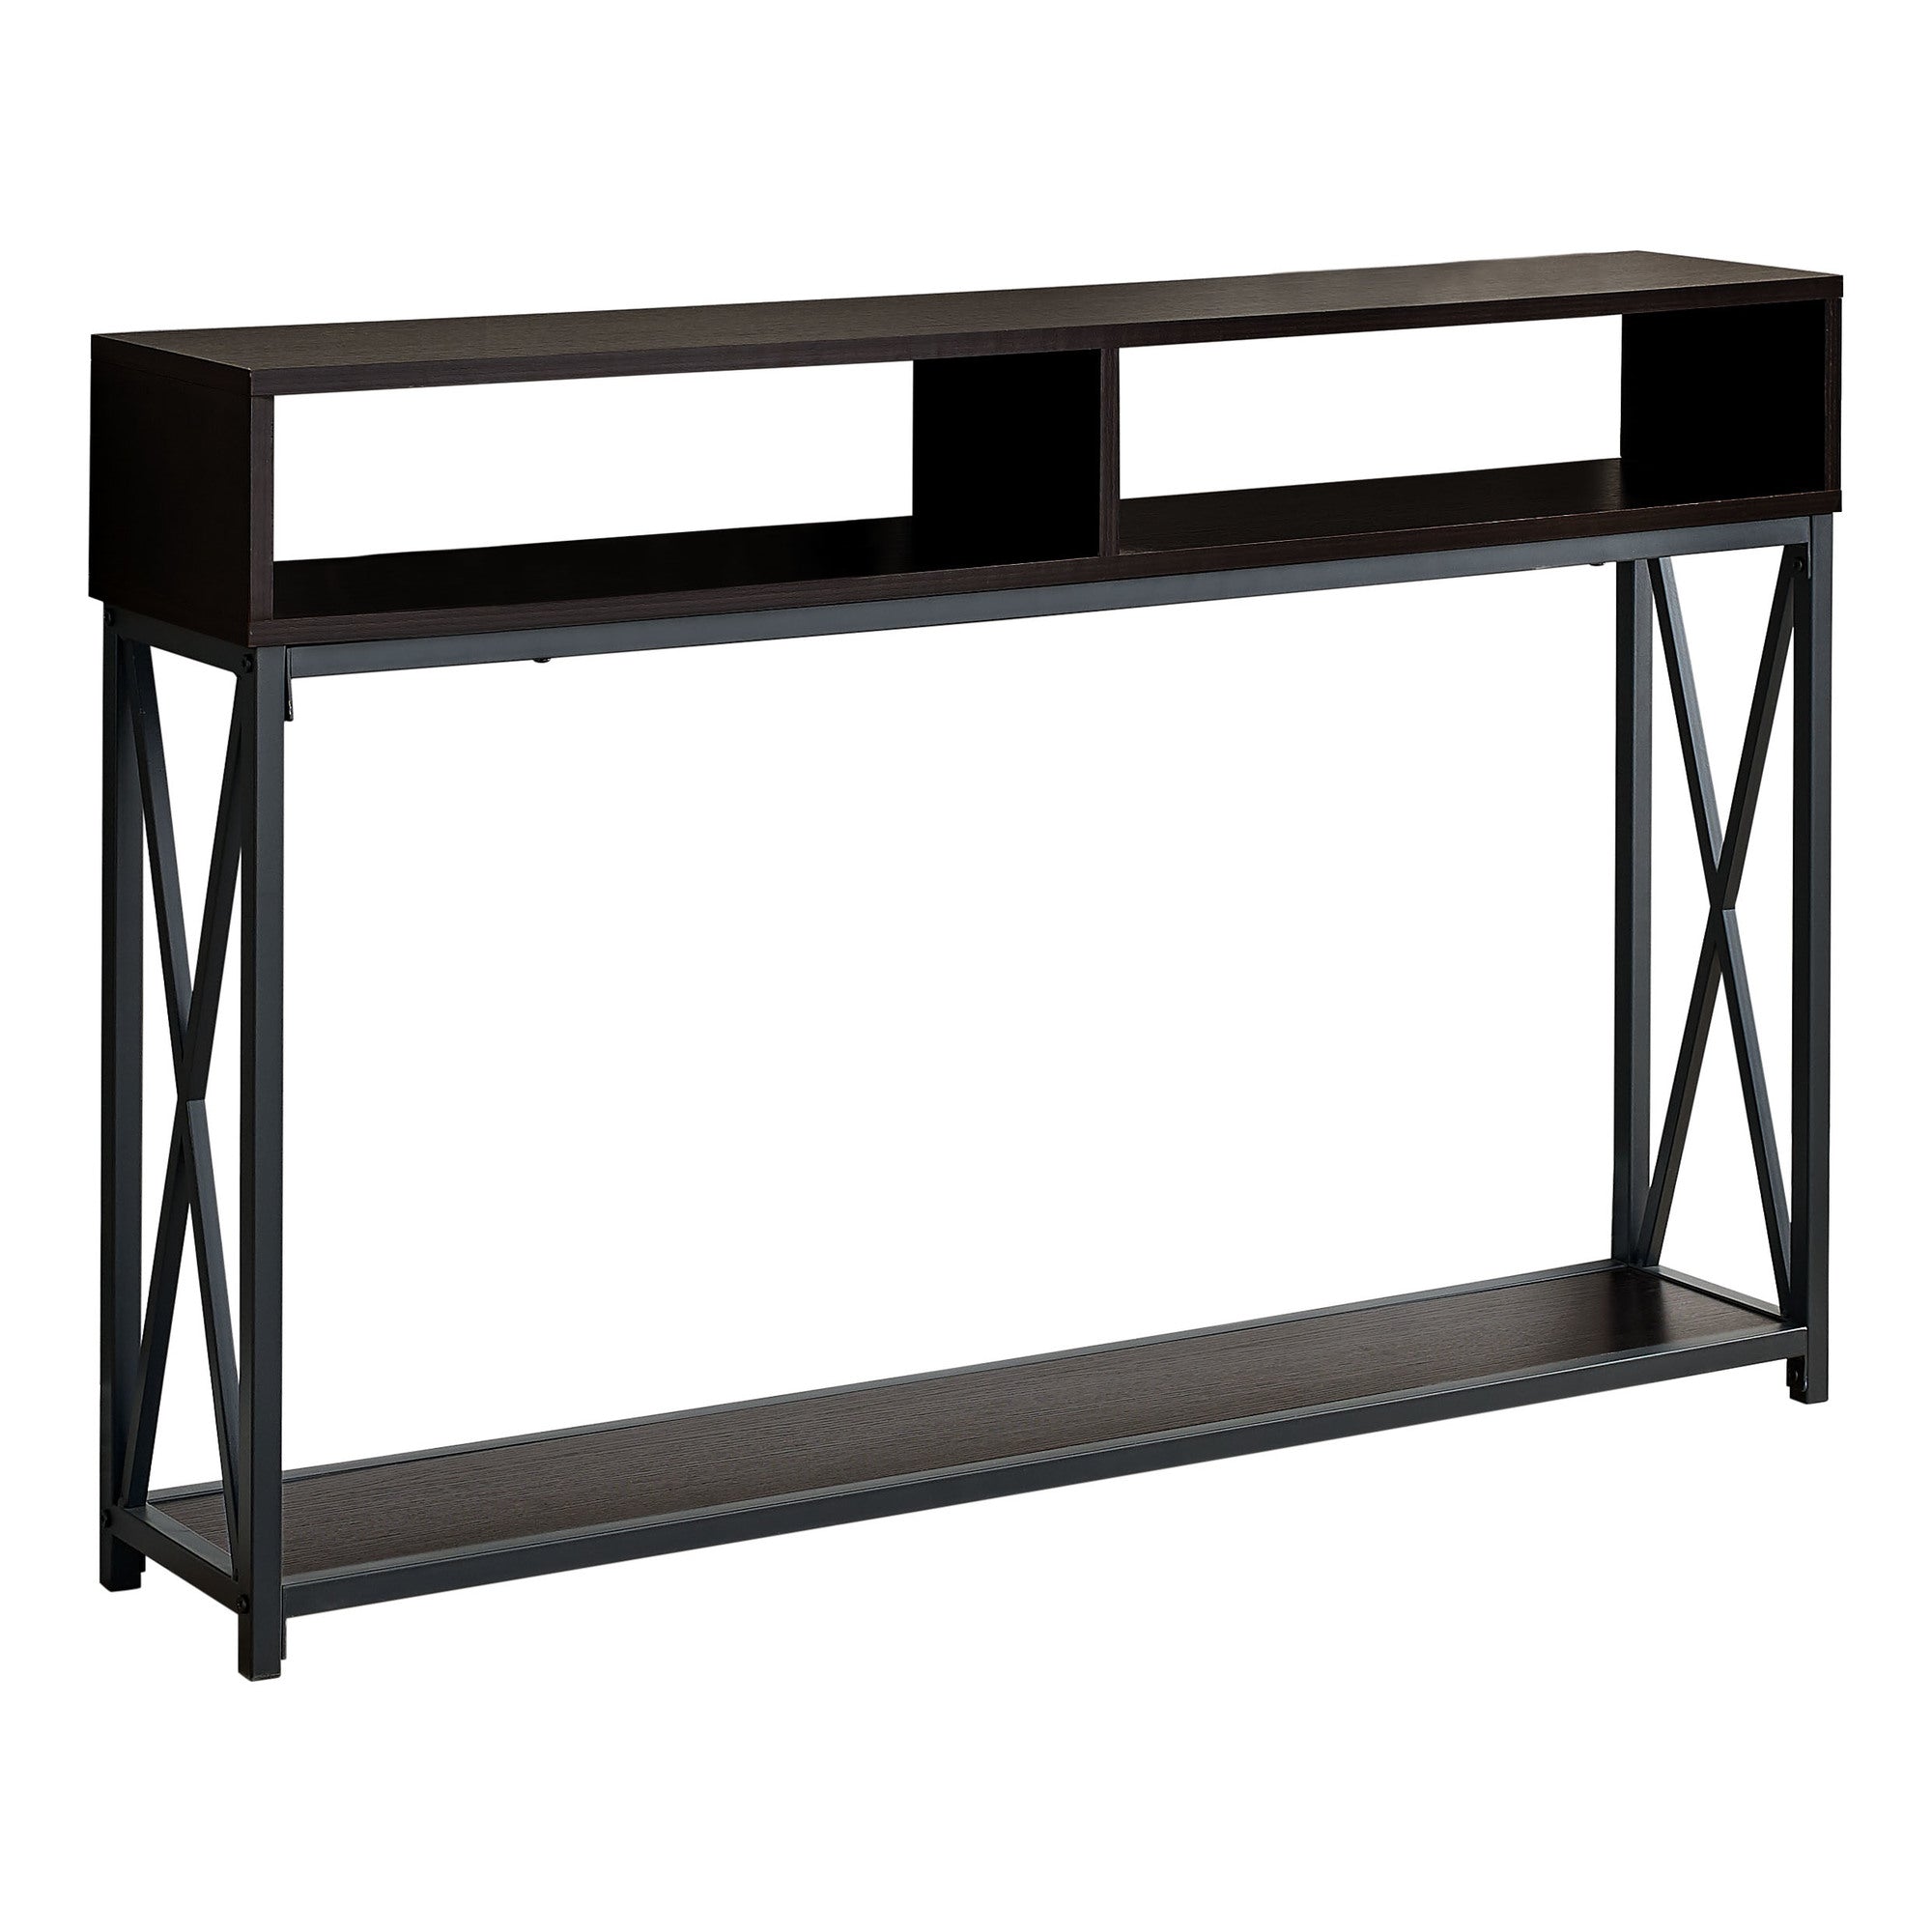 47" Brown And Black Frame Console Table With Storage